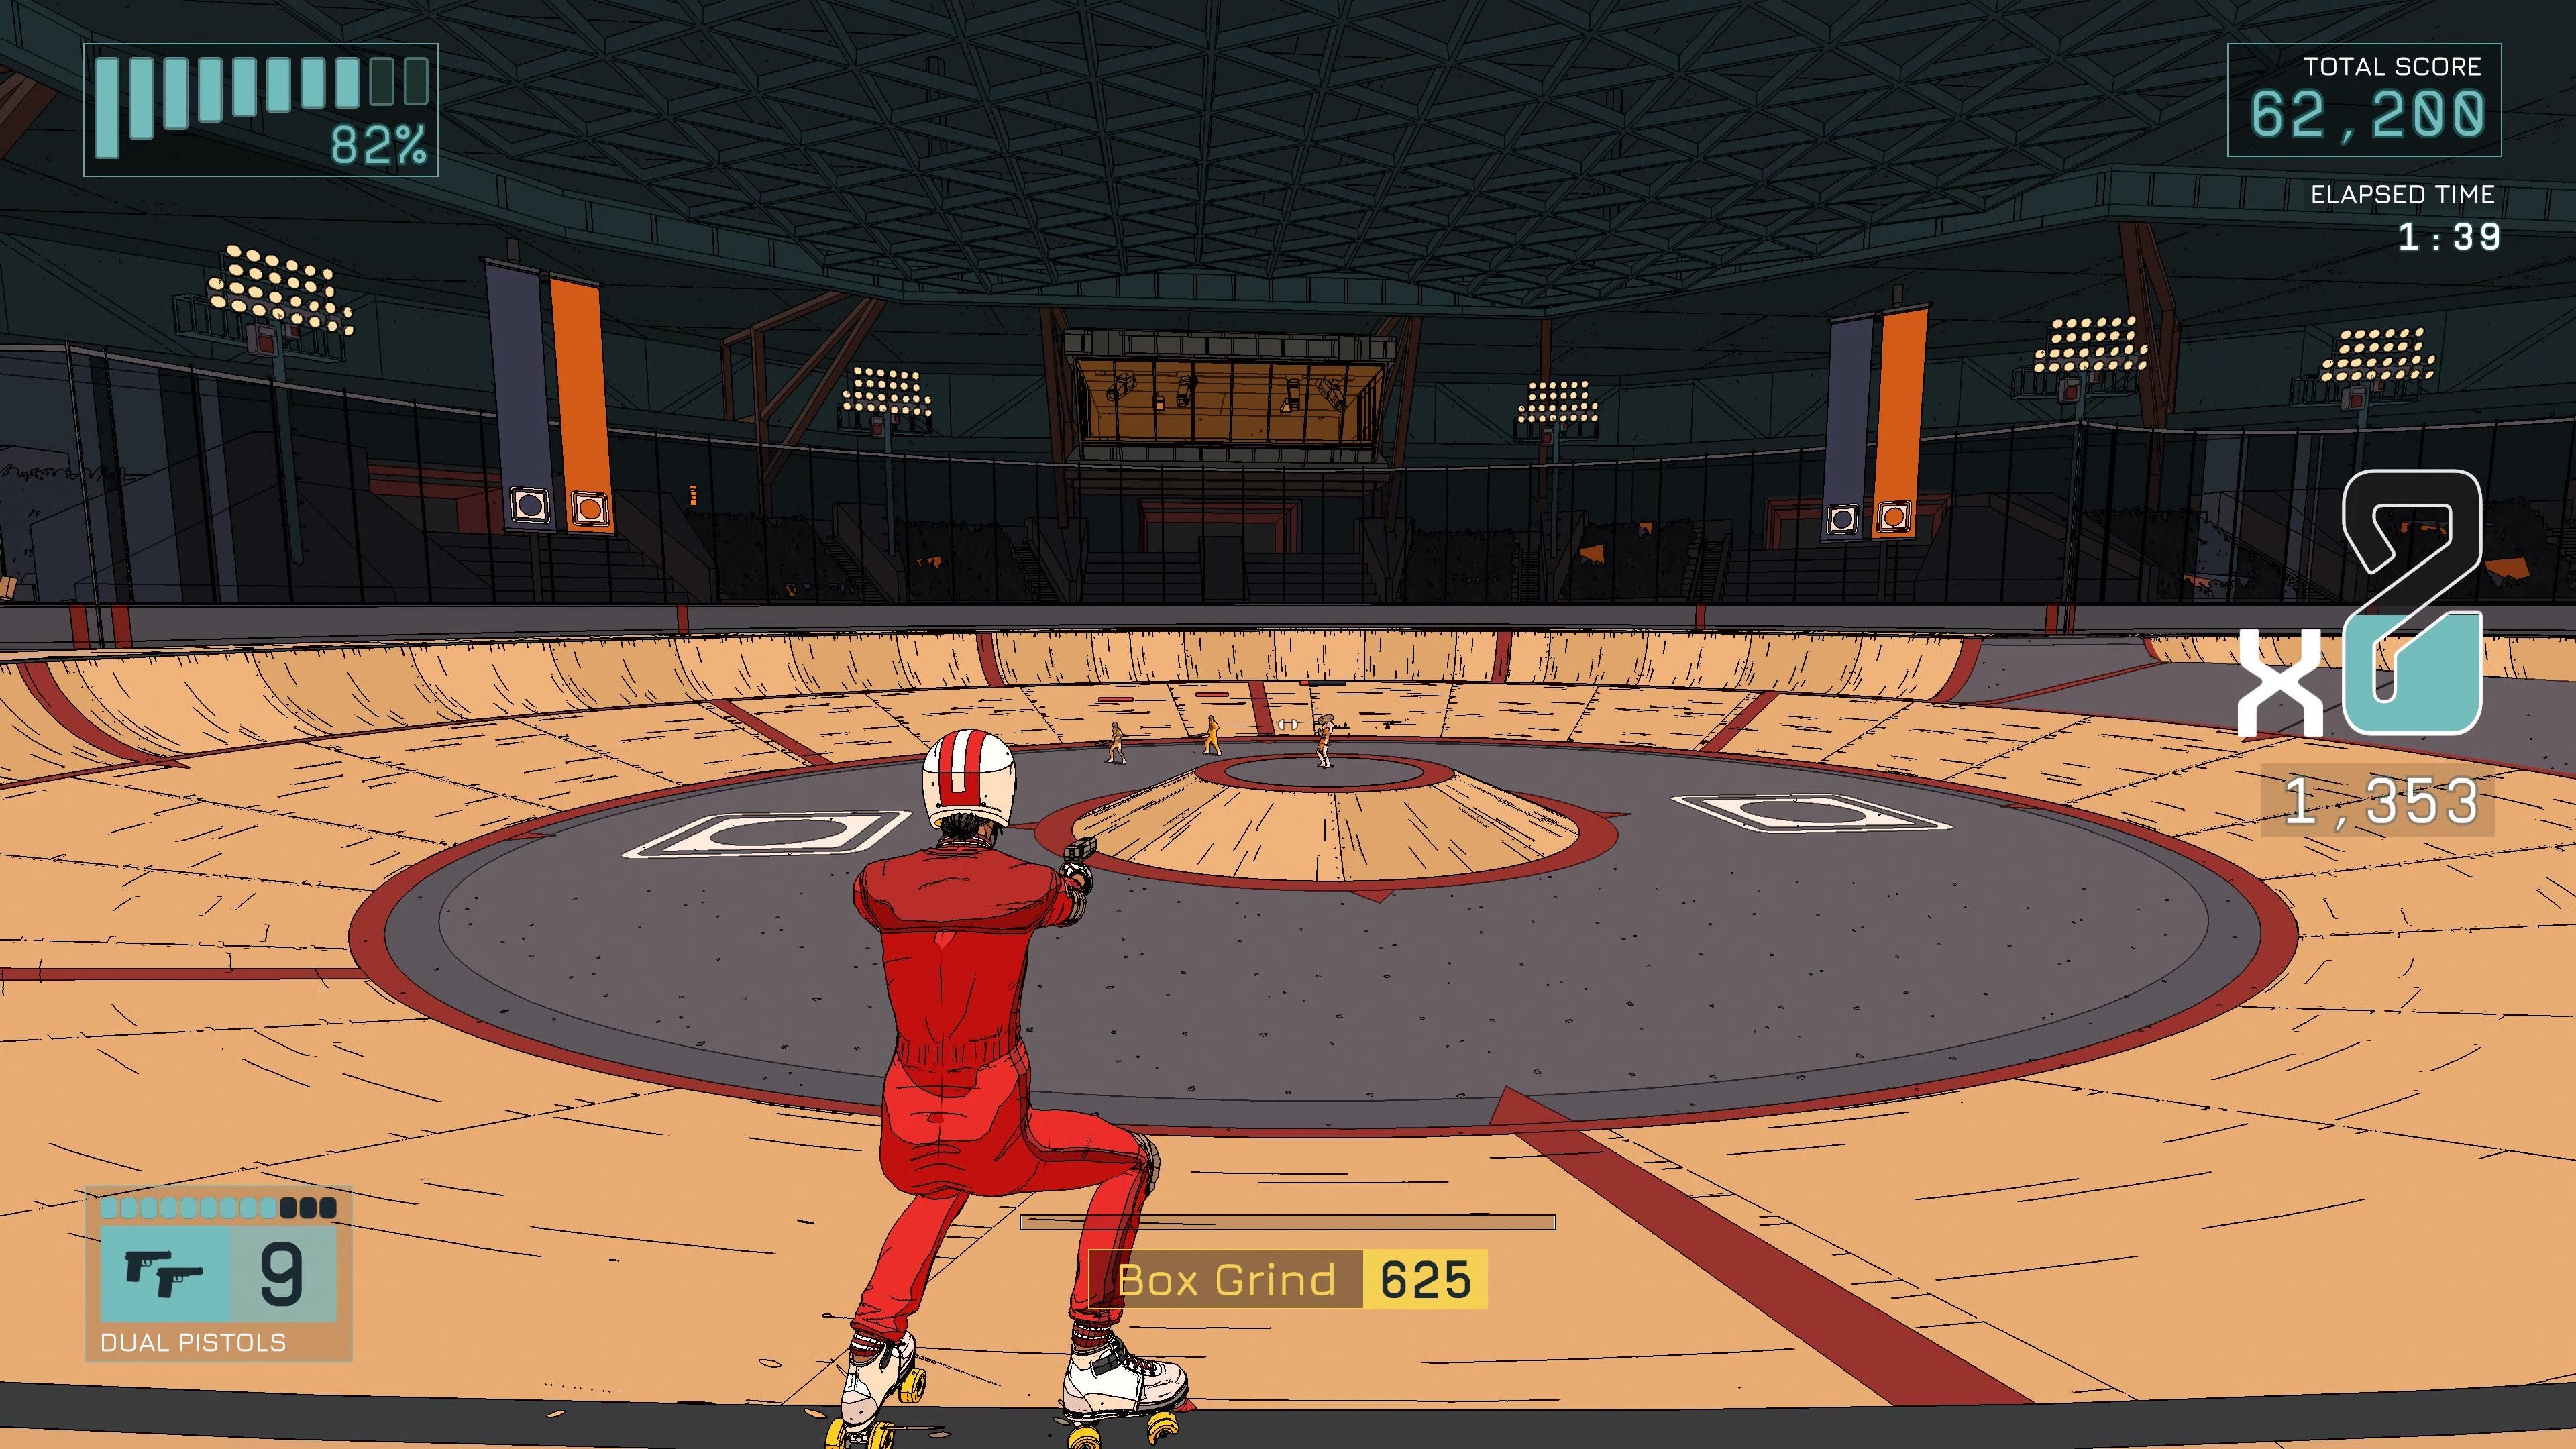 A variety of tricks are used in Rollerdrome to replenish ammo.